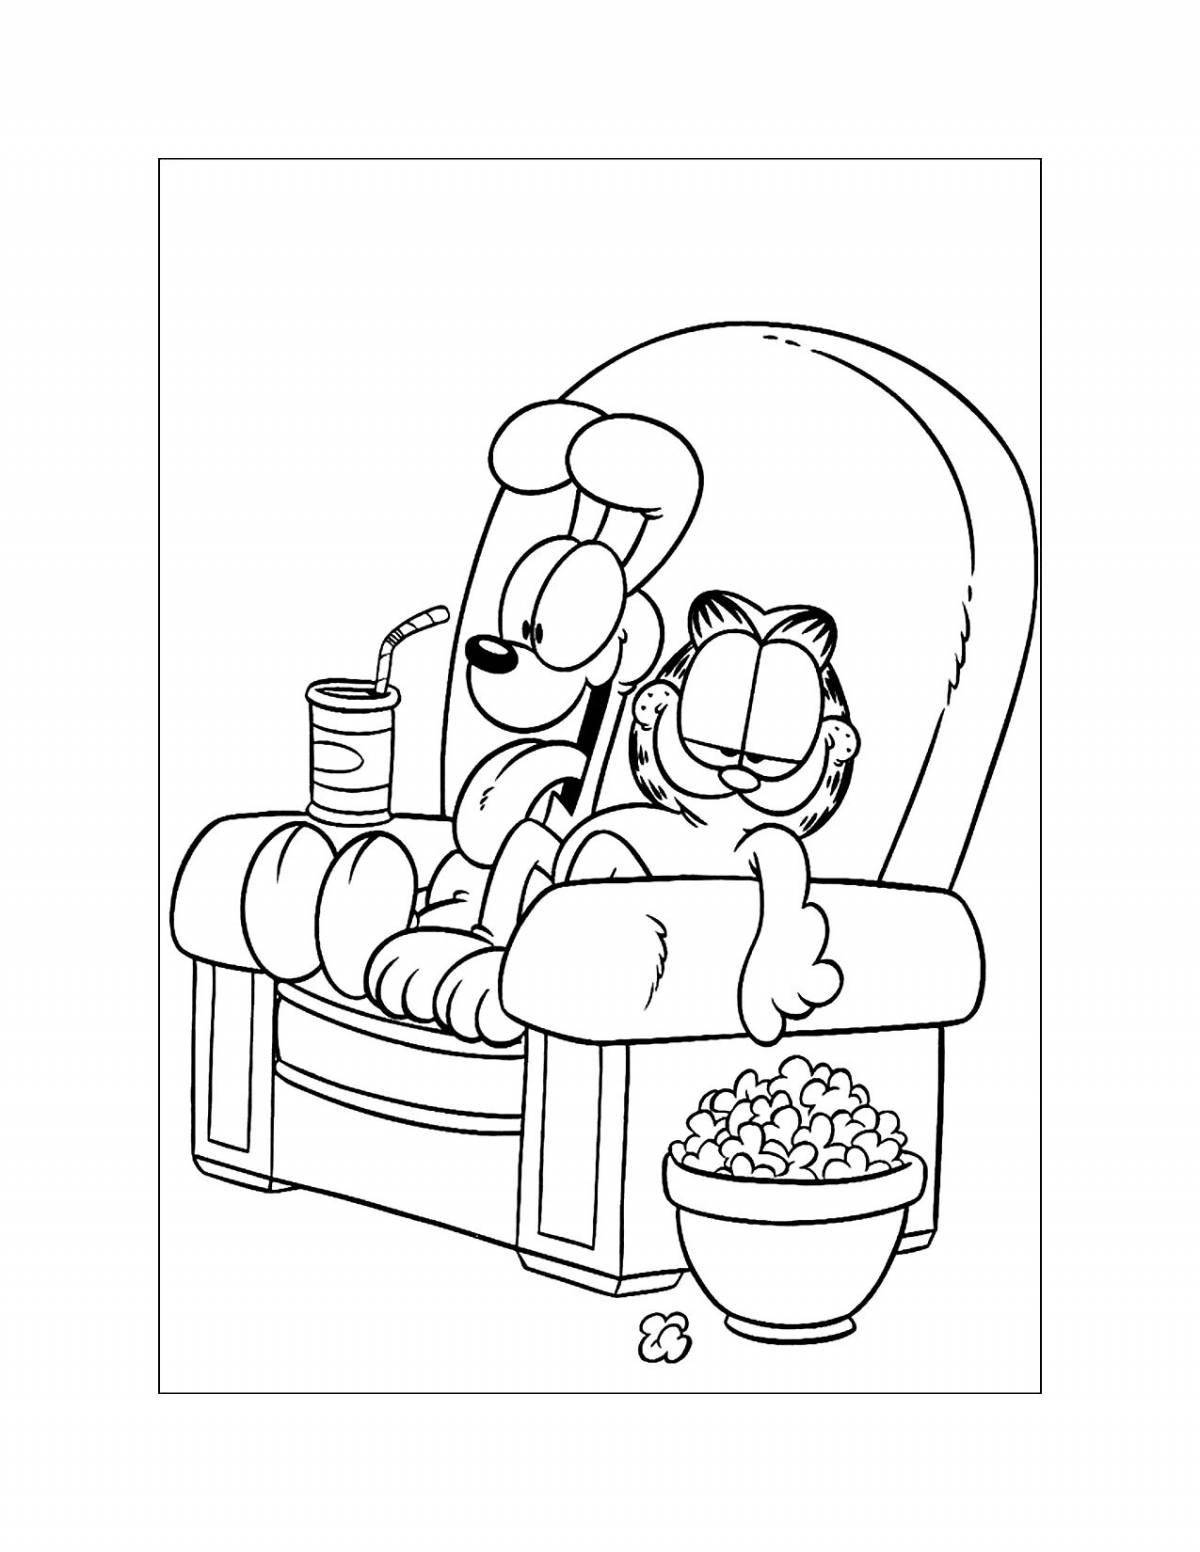 Adorable Garfield Coloring Page